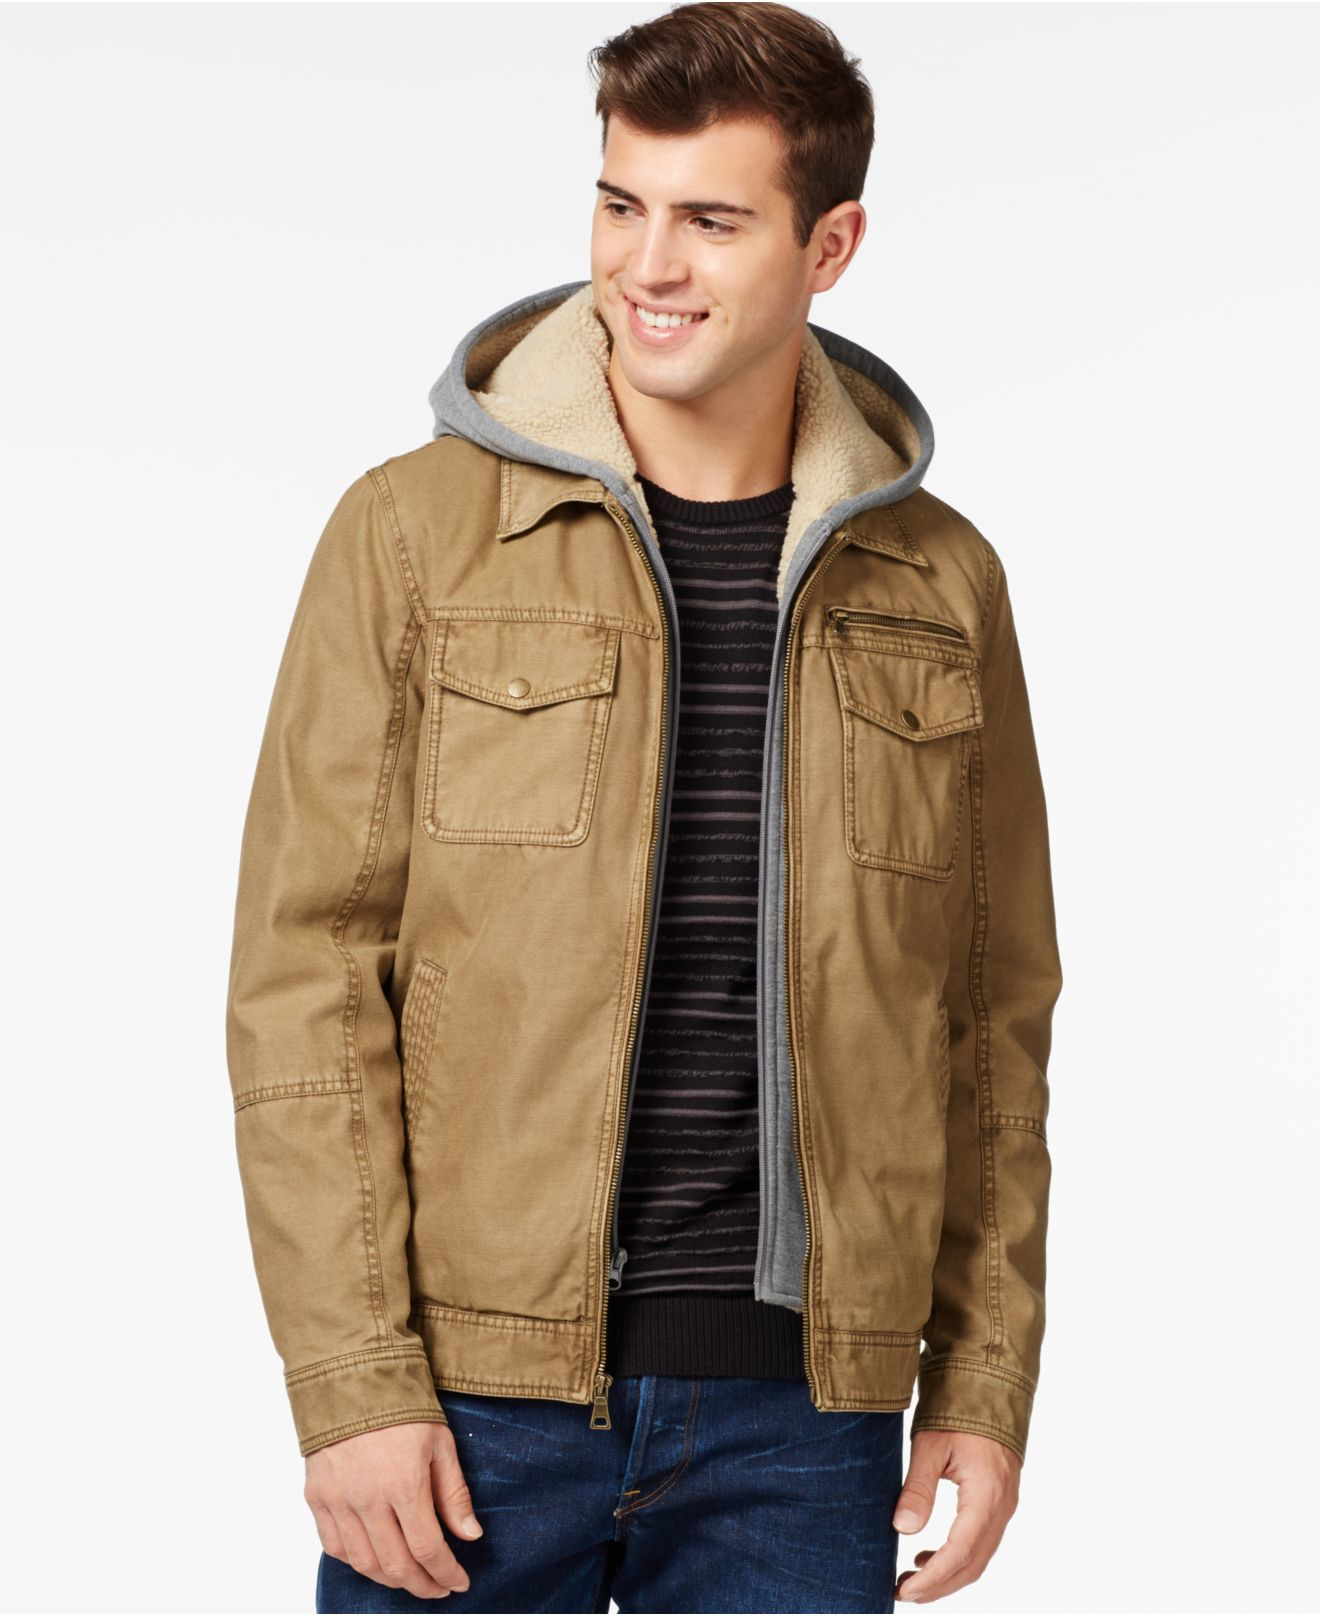 Guess Trucker Jacket With Removable Hood in Khaki (Natural) for Men - Lyst